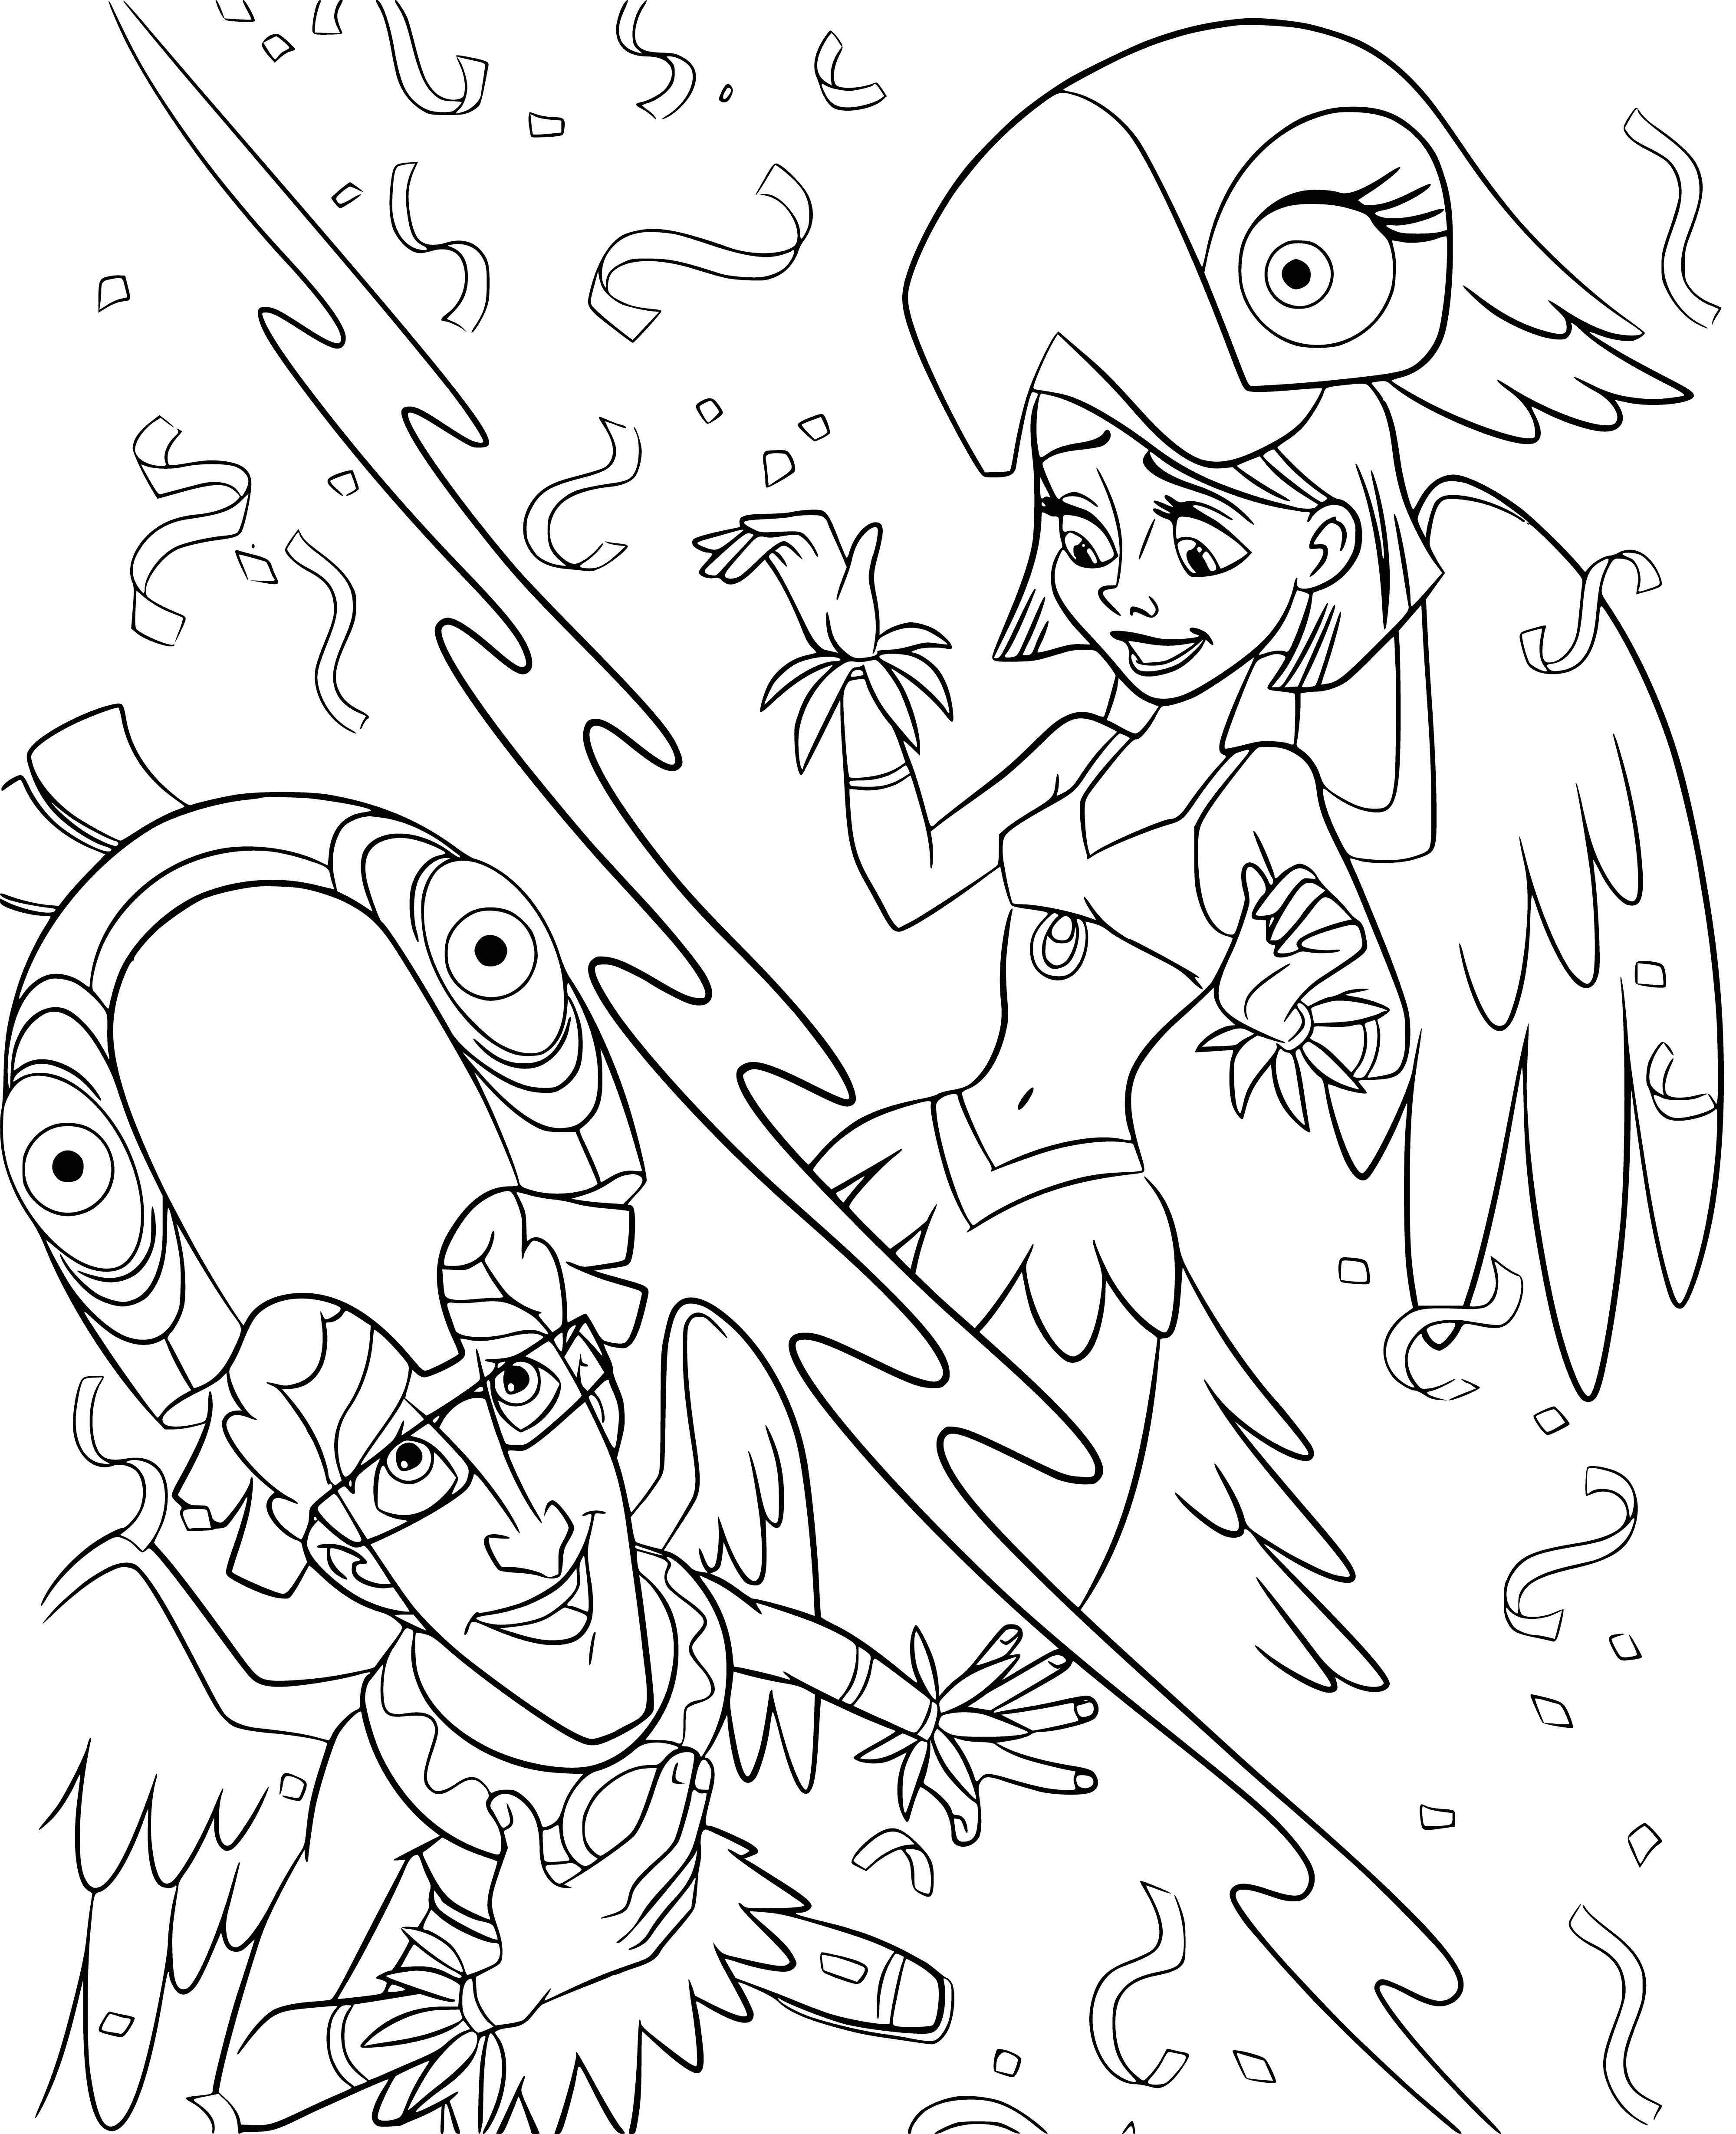 coloring page: People wearing colorful clothes, umbrellas and dancing merrily in a coloring page-perfect scene.